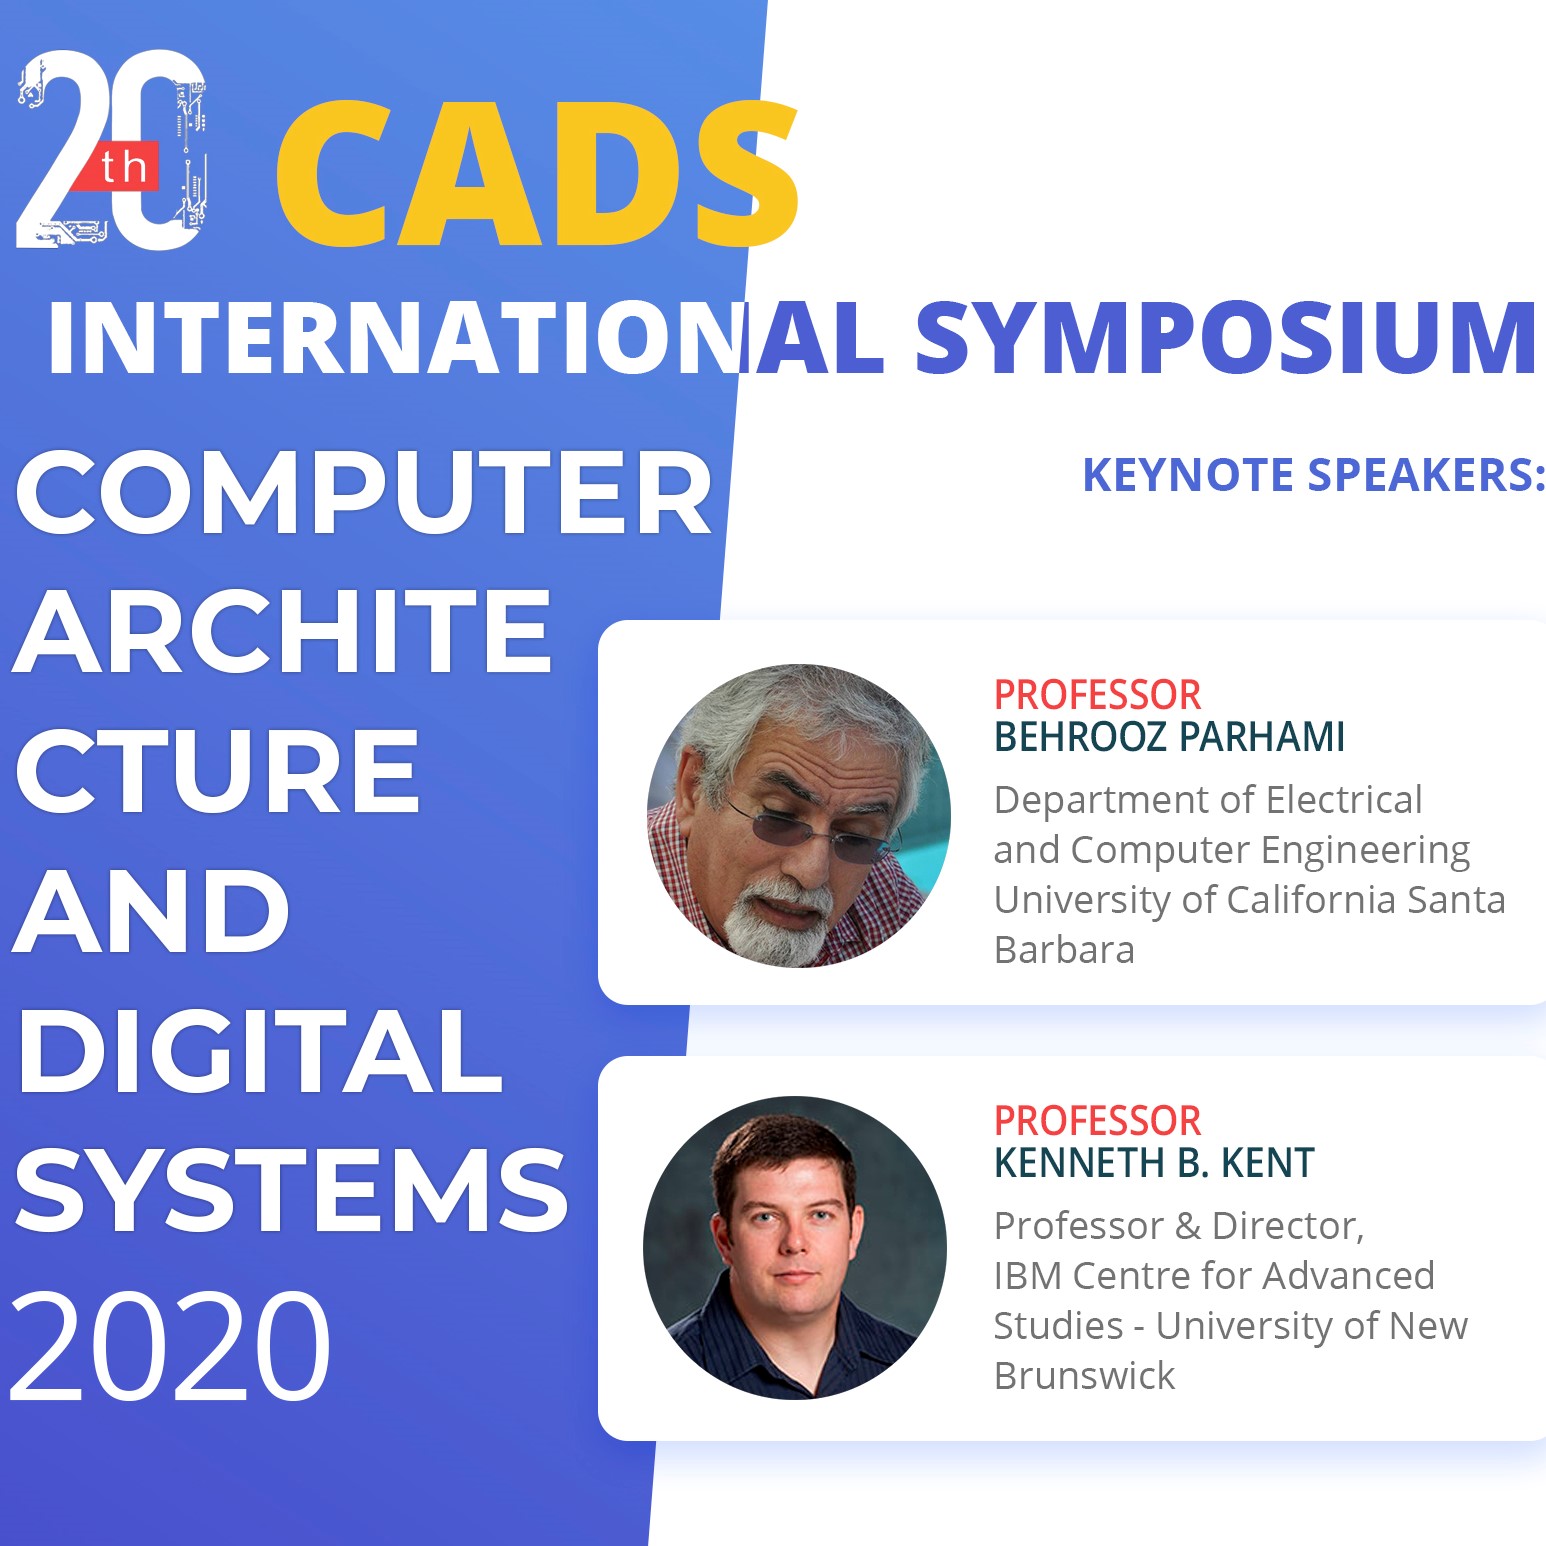 My keynote lecture at CADS 2020: Conference flyer